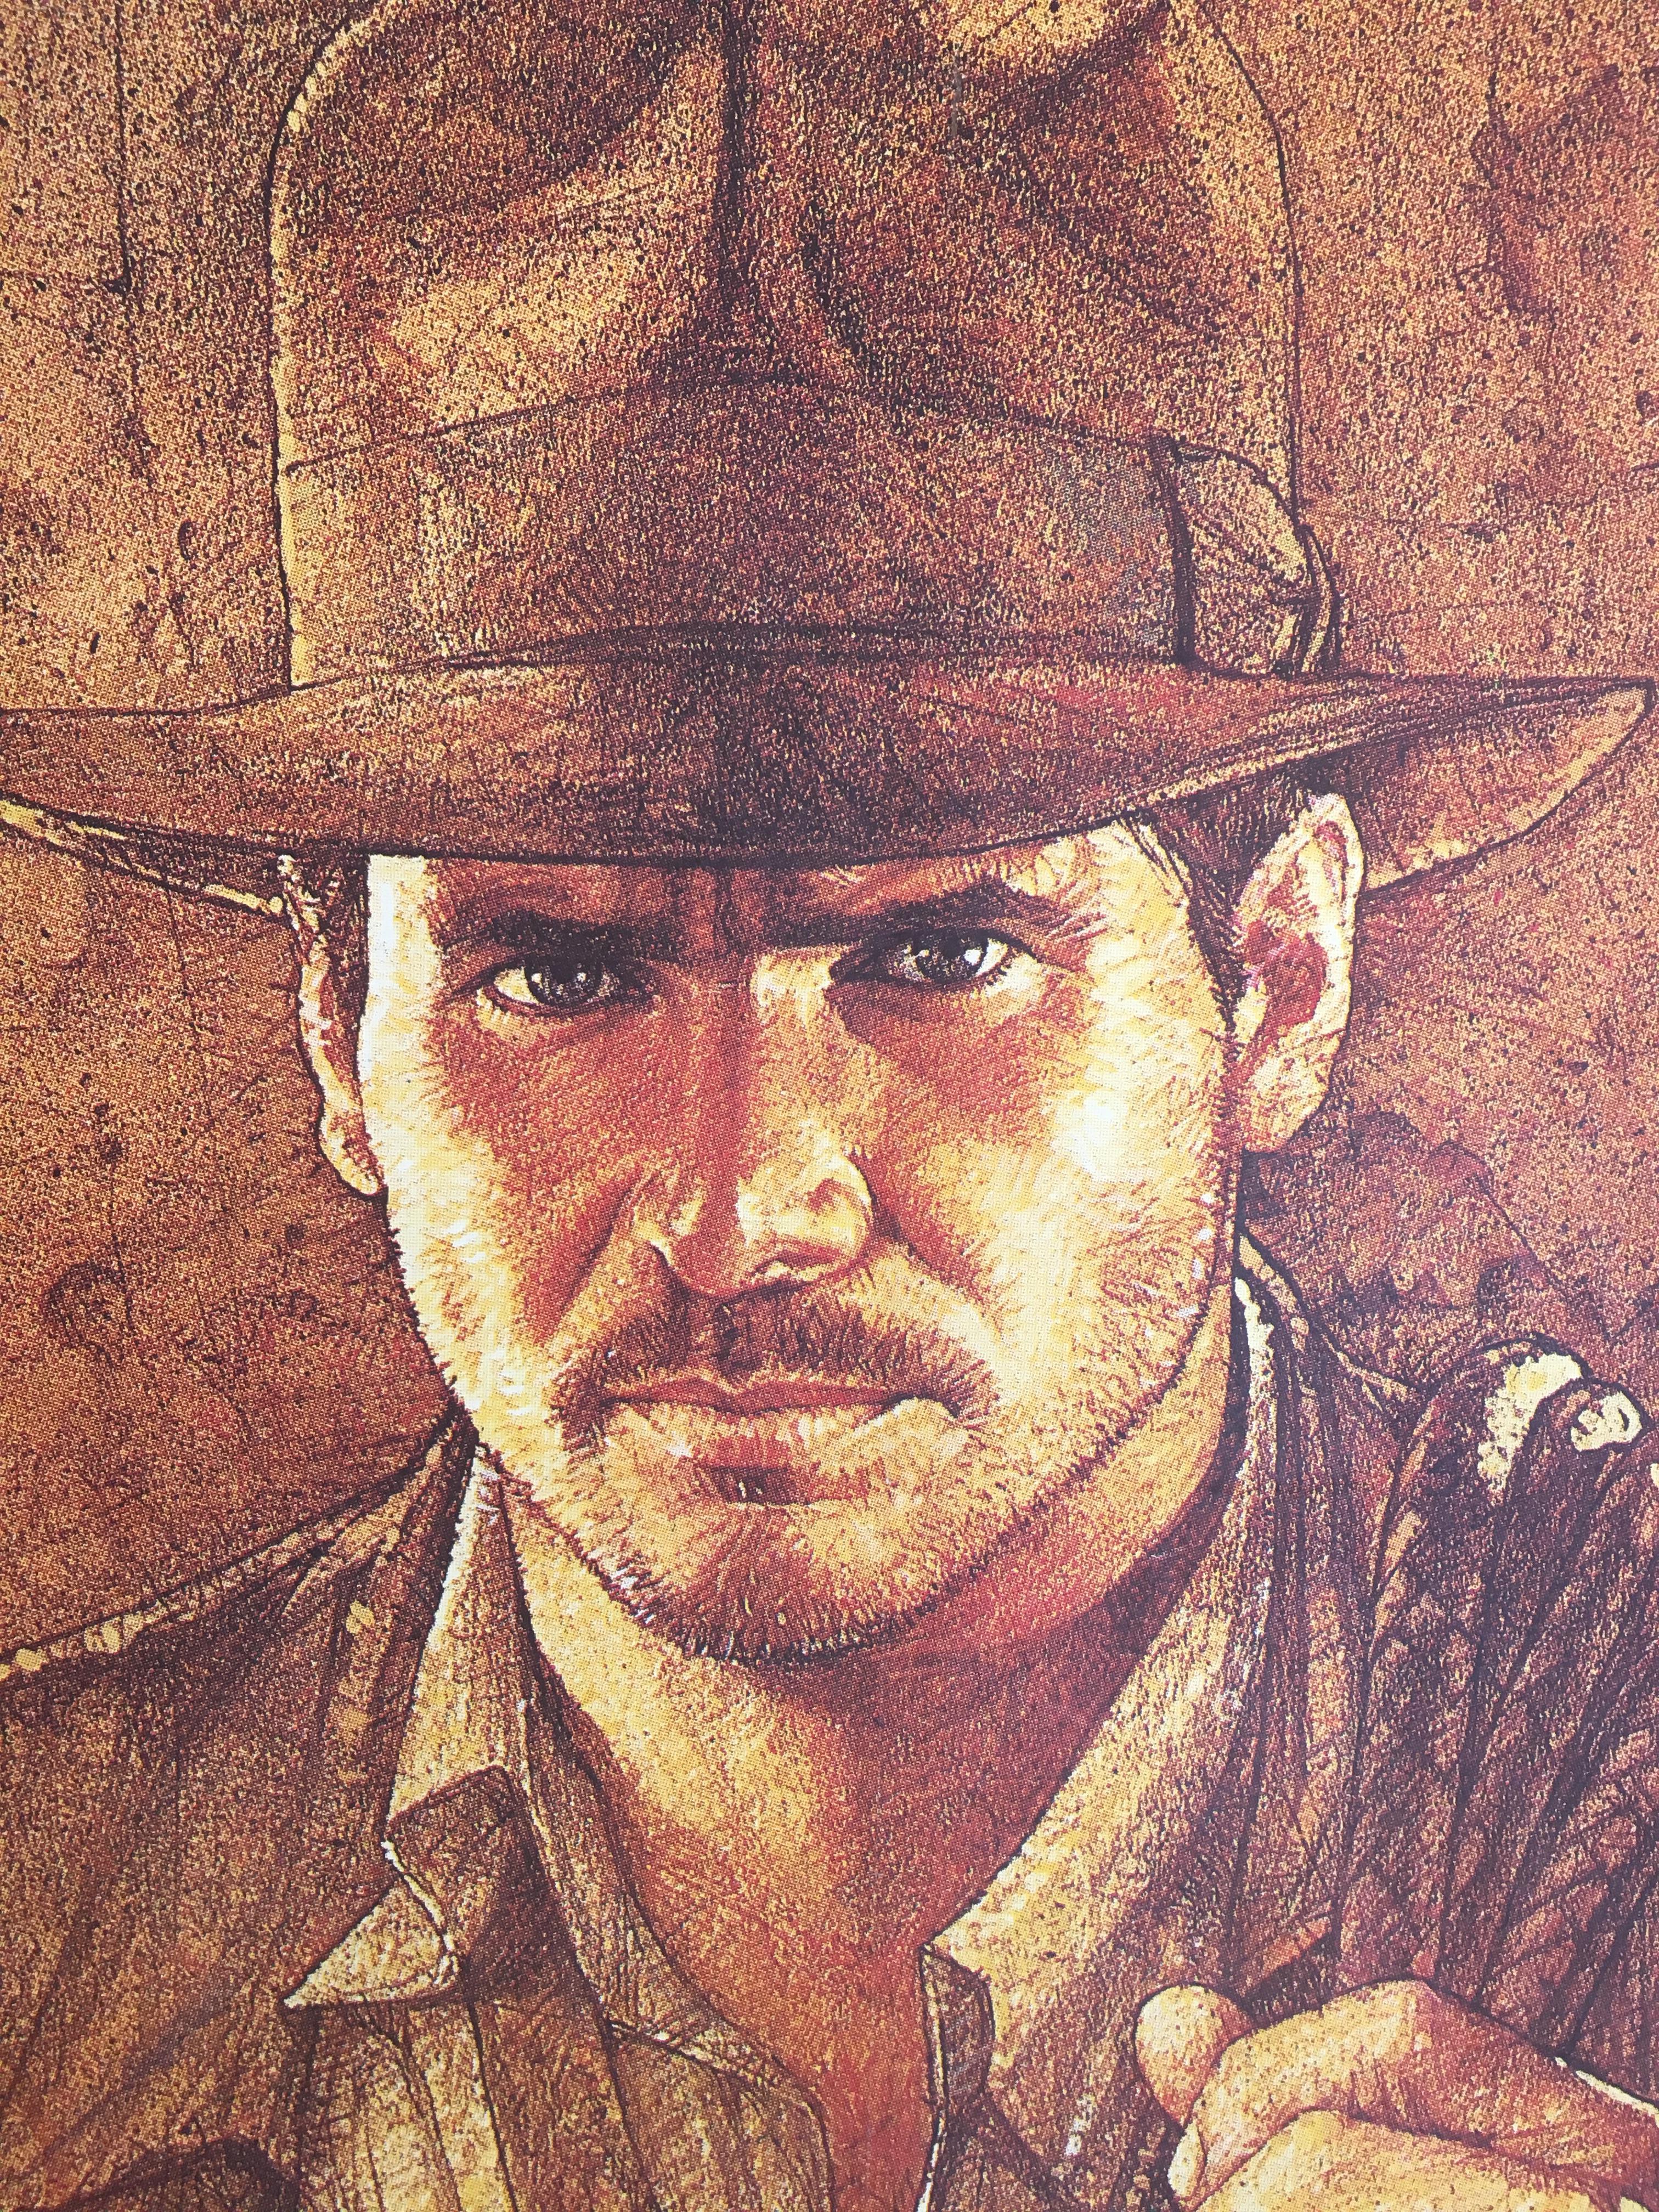 Raiders of the Lost Ark, 1981: Original Indiana Jones theatrical movie poster starring Harrison Ford and Karen Allen, Paul Freeman directed by Steven Spielberg and written by George Lucas. This film won 4 Oscars and had 24 other wins and 21 other